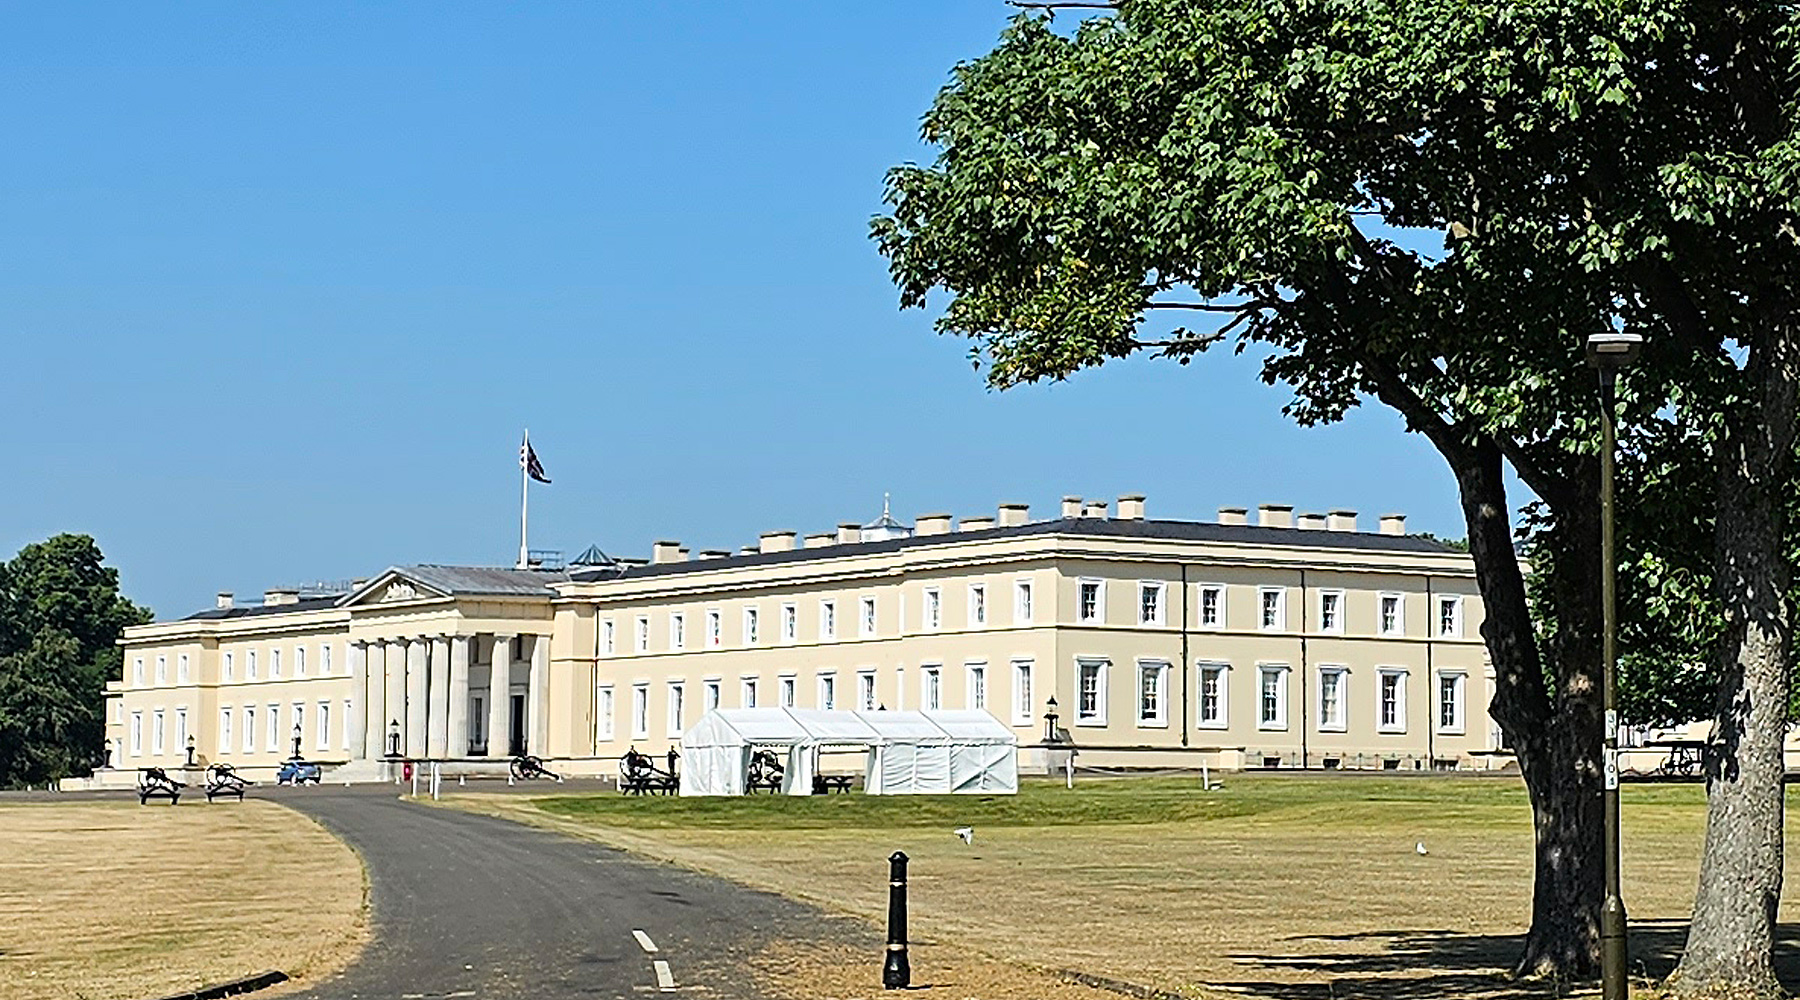 The Royal Military Academy Sandhurst is offering public tours of their ...